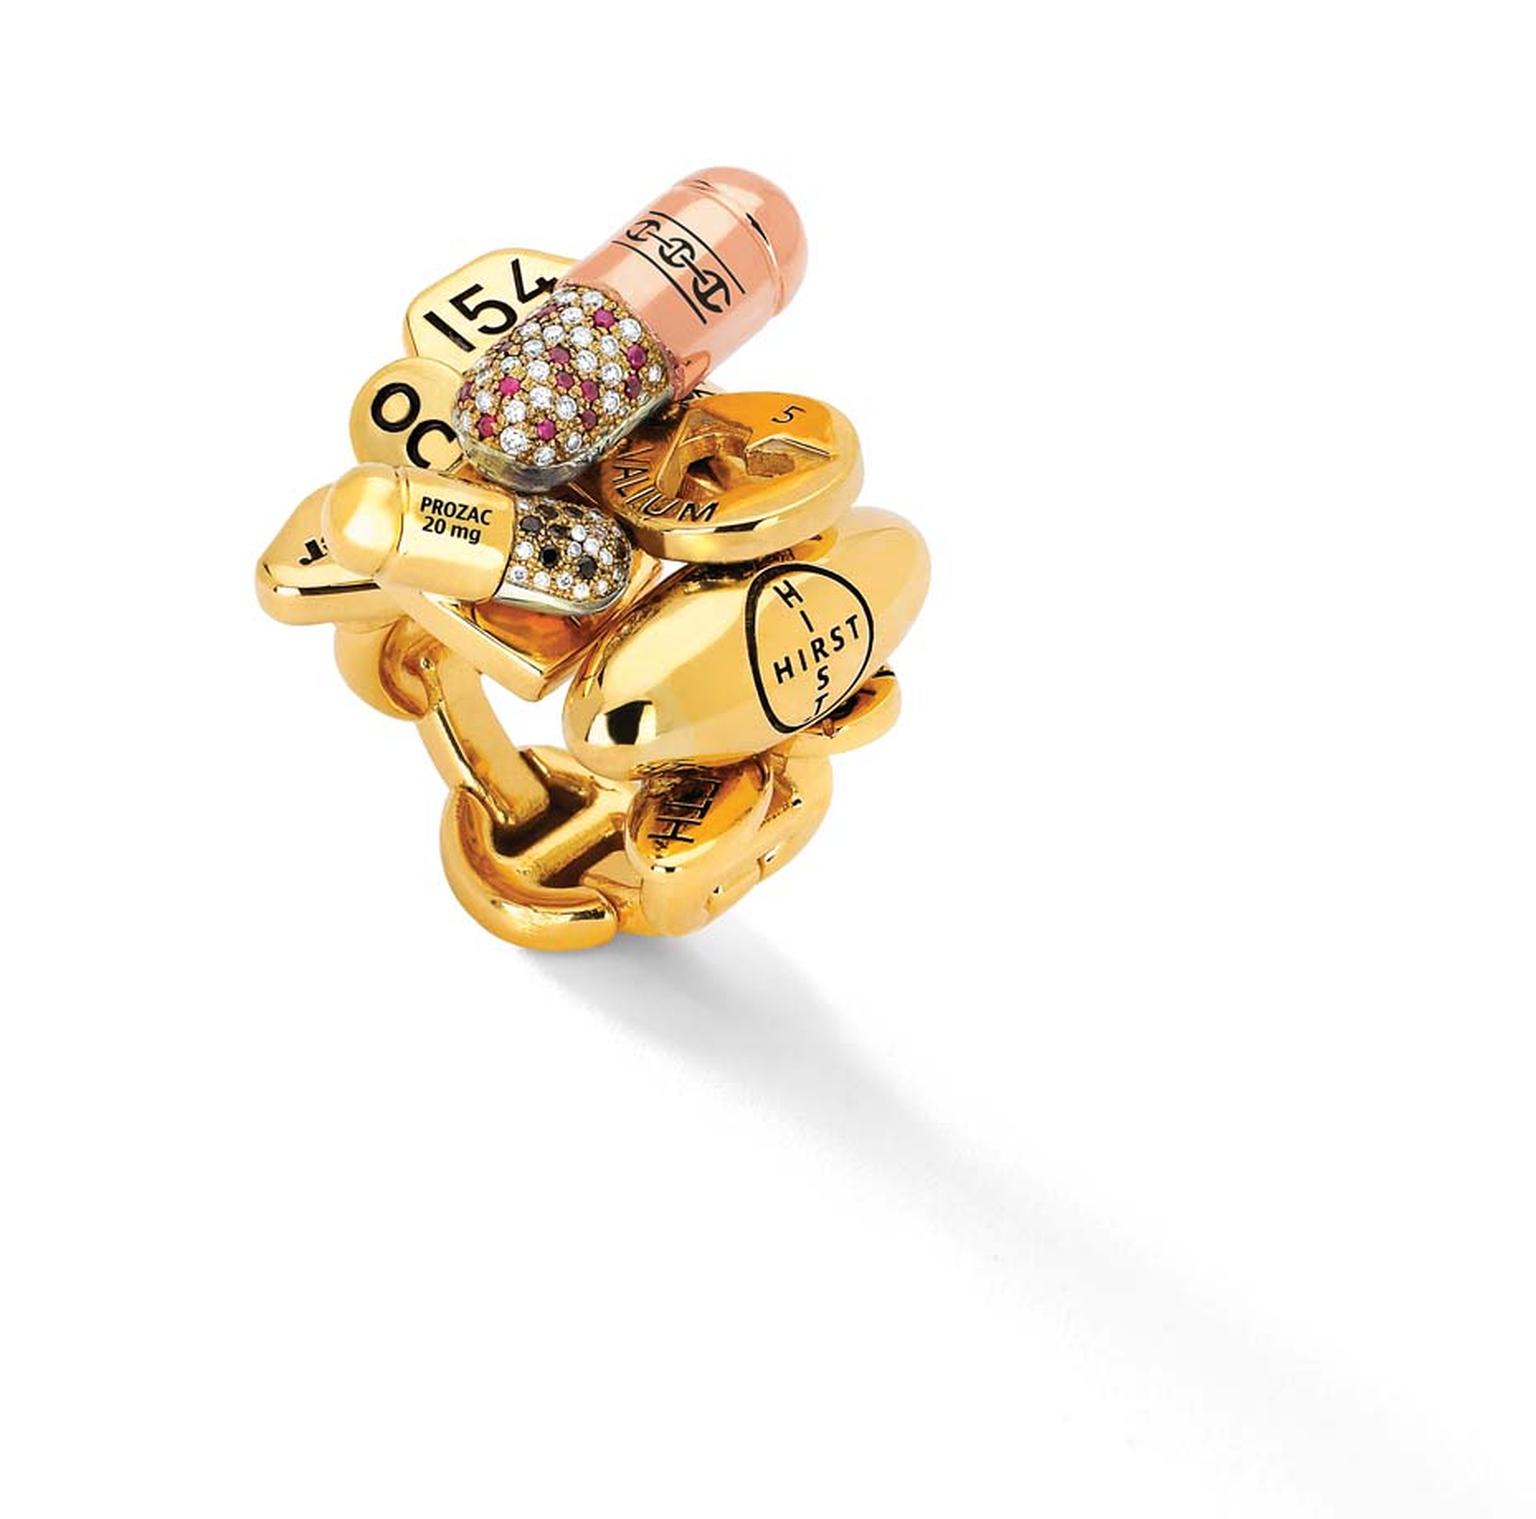 Hoorsenbuhs limited-edition Pill ring, created in collaboration with British artist Damien Hirst, colorfully mixes rose, yellow and white gold with rubies and black and white diamonds with the brand's signature links.